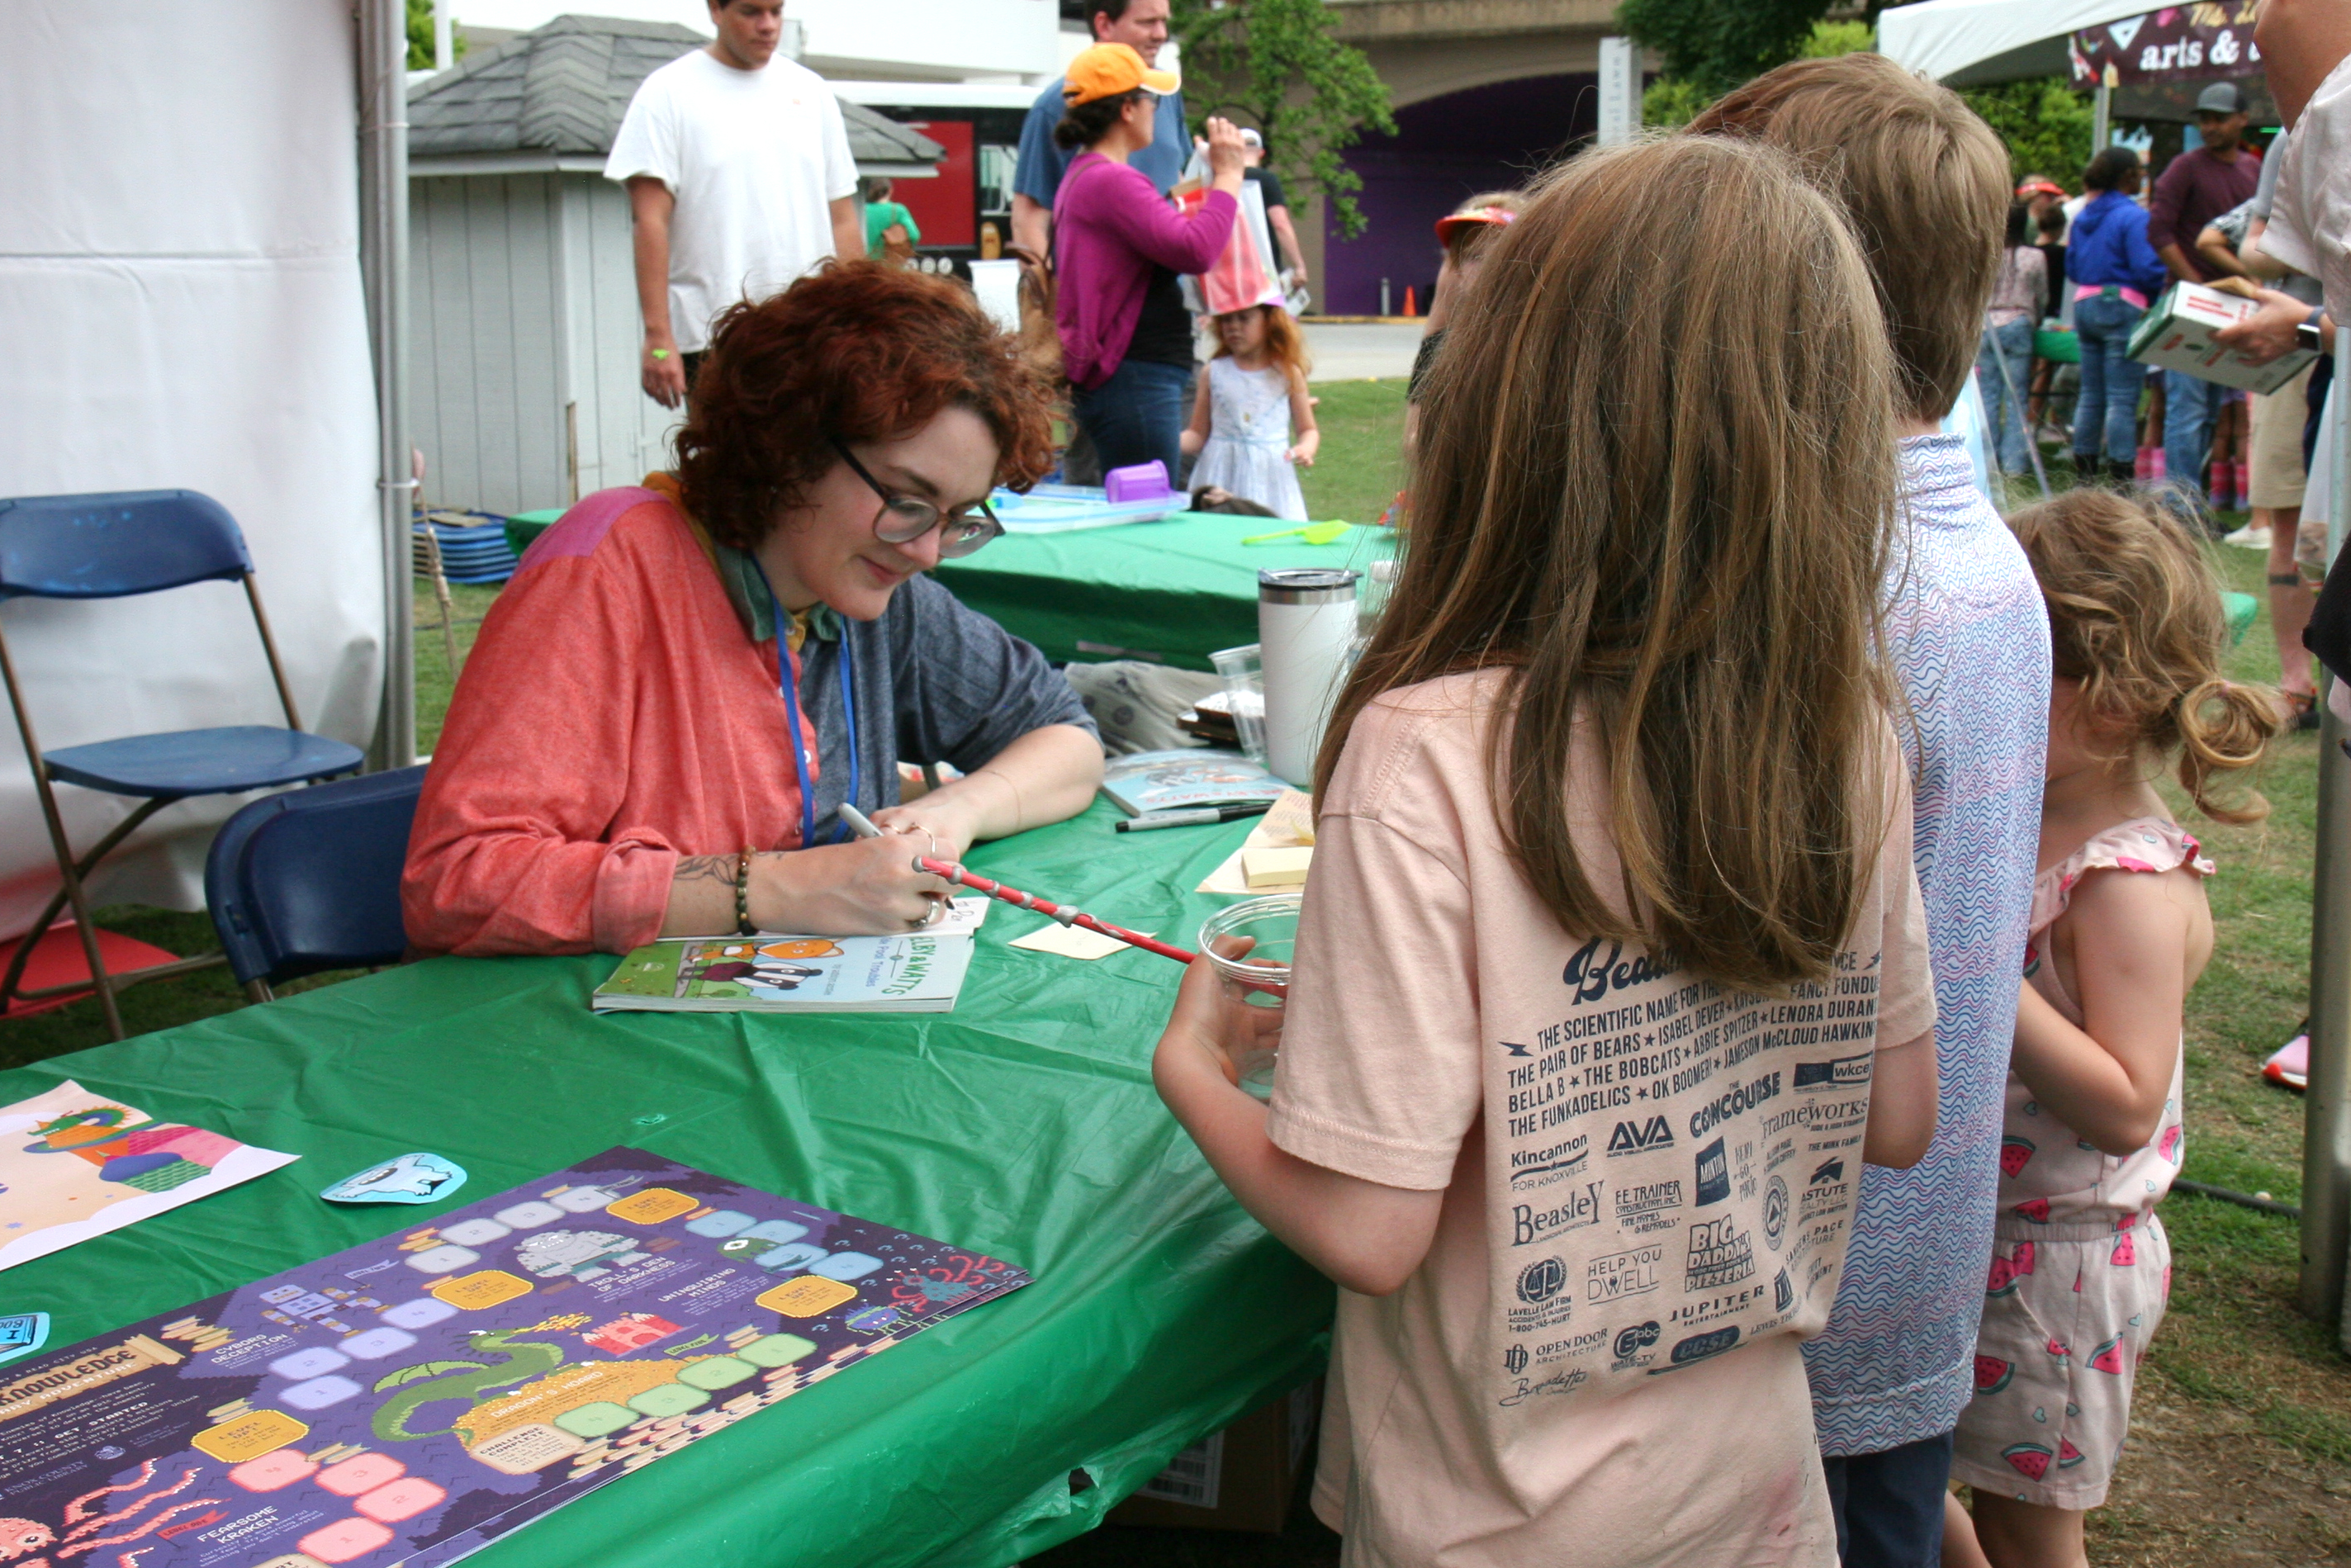 author signs a book at a table, meeting three young fans